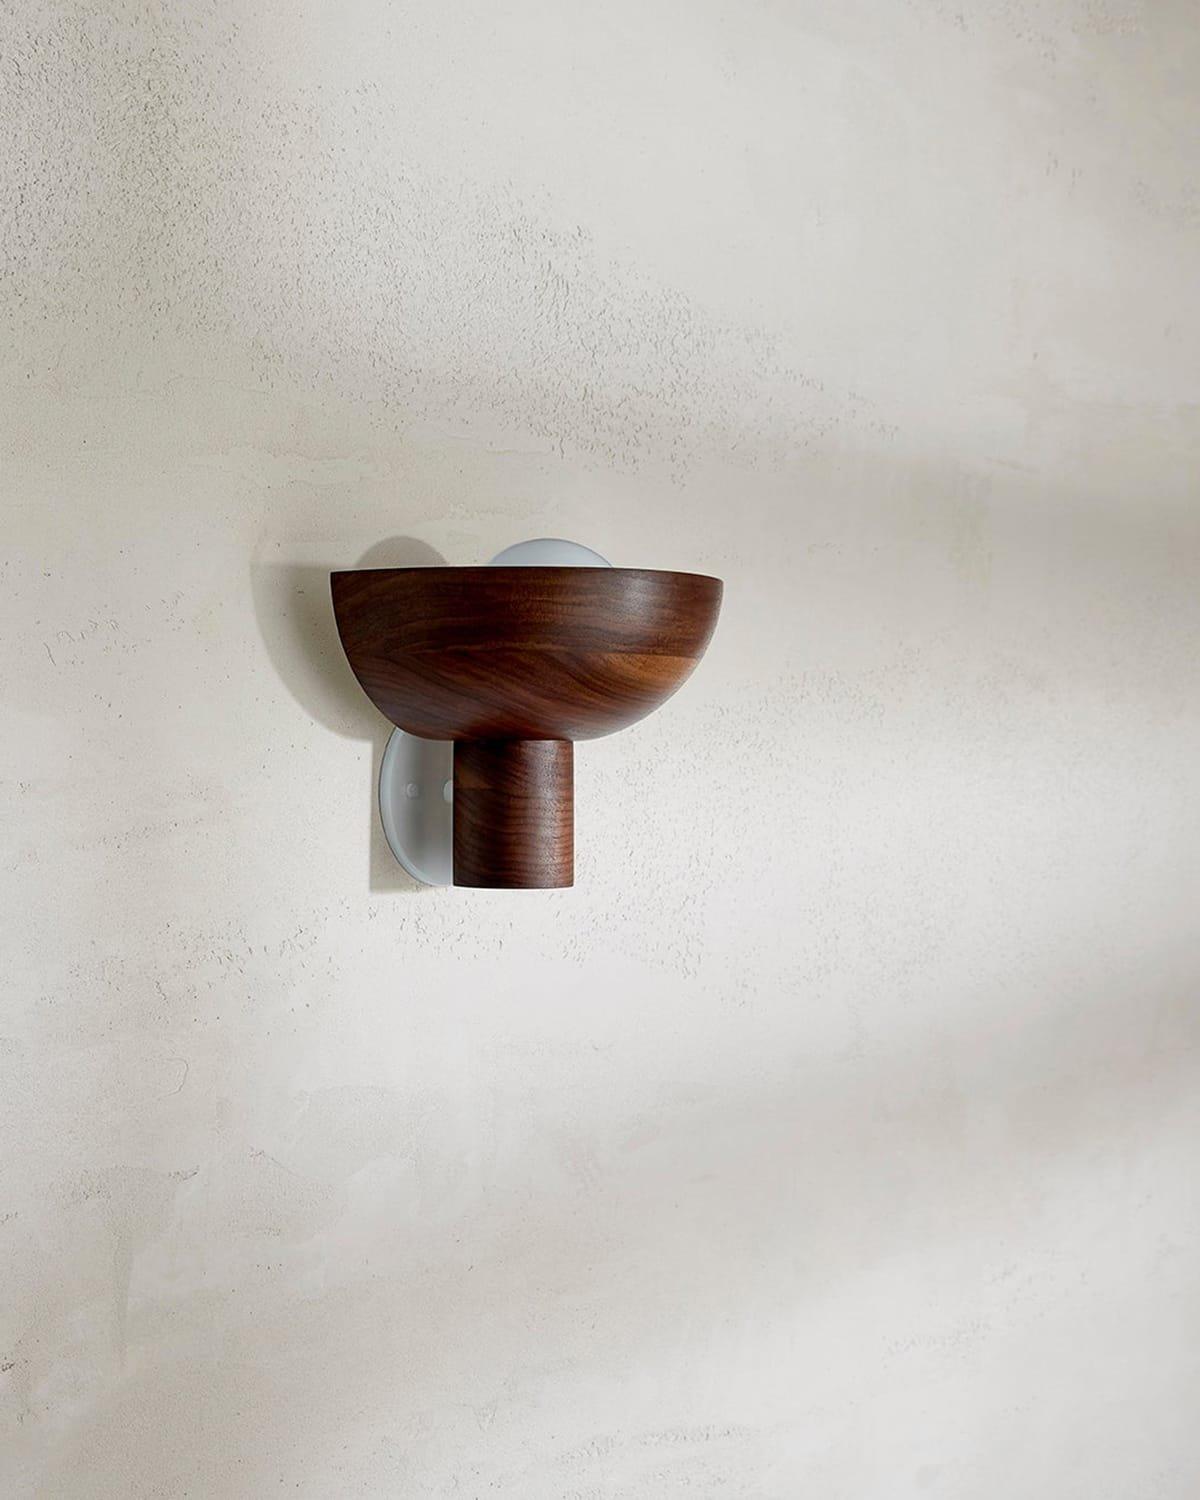 Selene Uplight organic contemporary timber wall light on Nook Collections